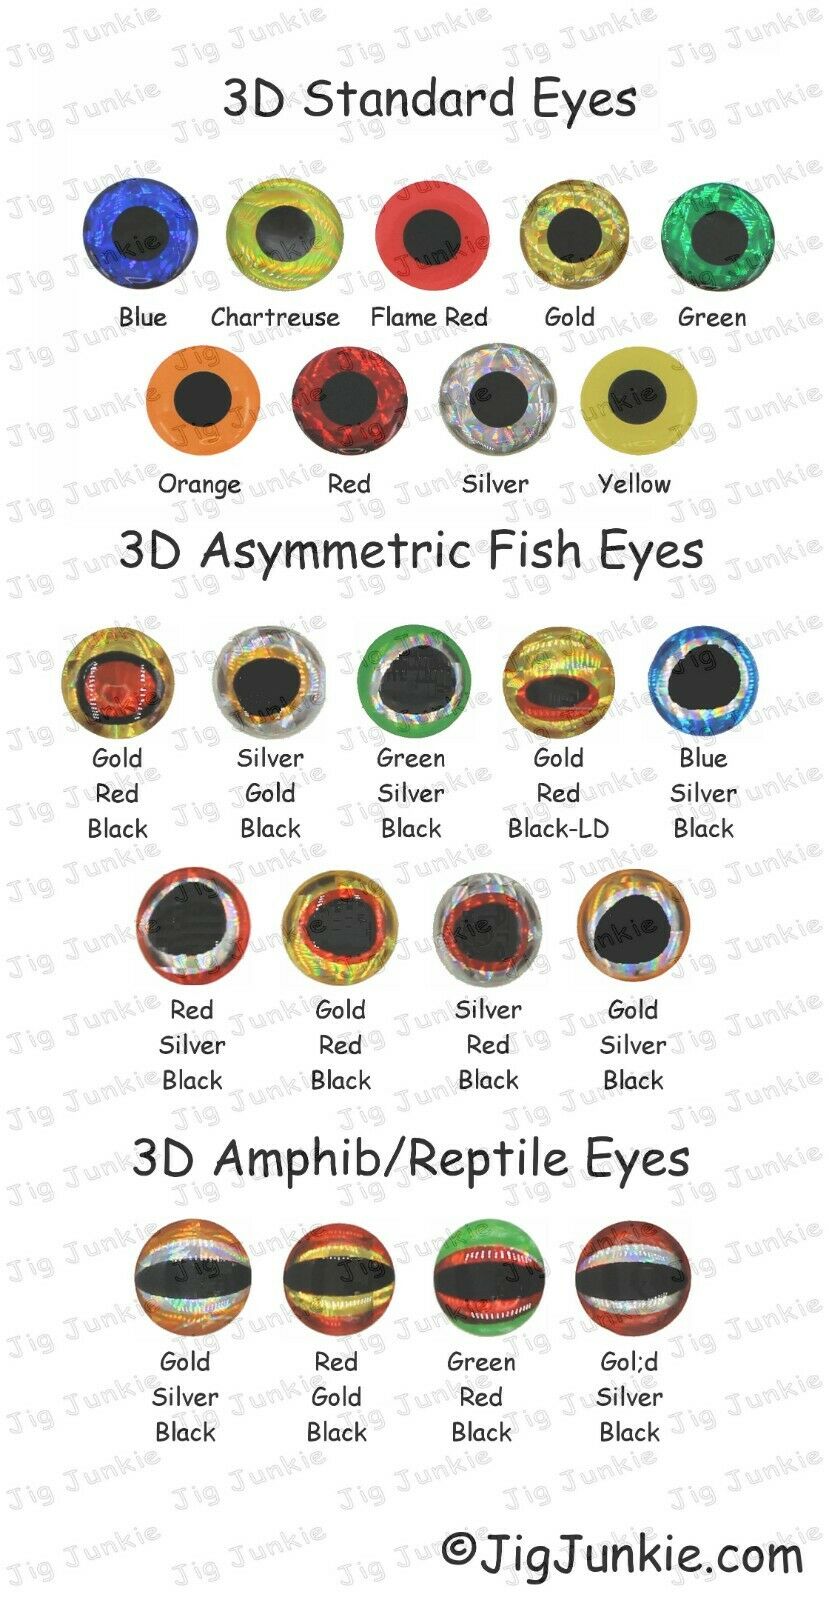 3d Holographic Fishing Lure Eyes - Best In Value!!!! - Ships From Usa